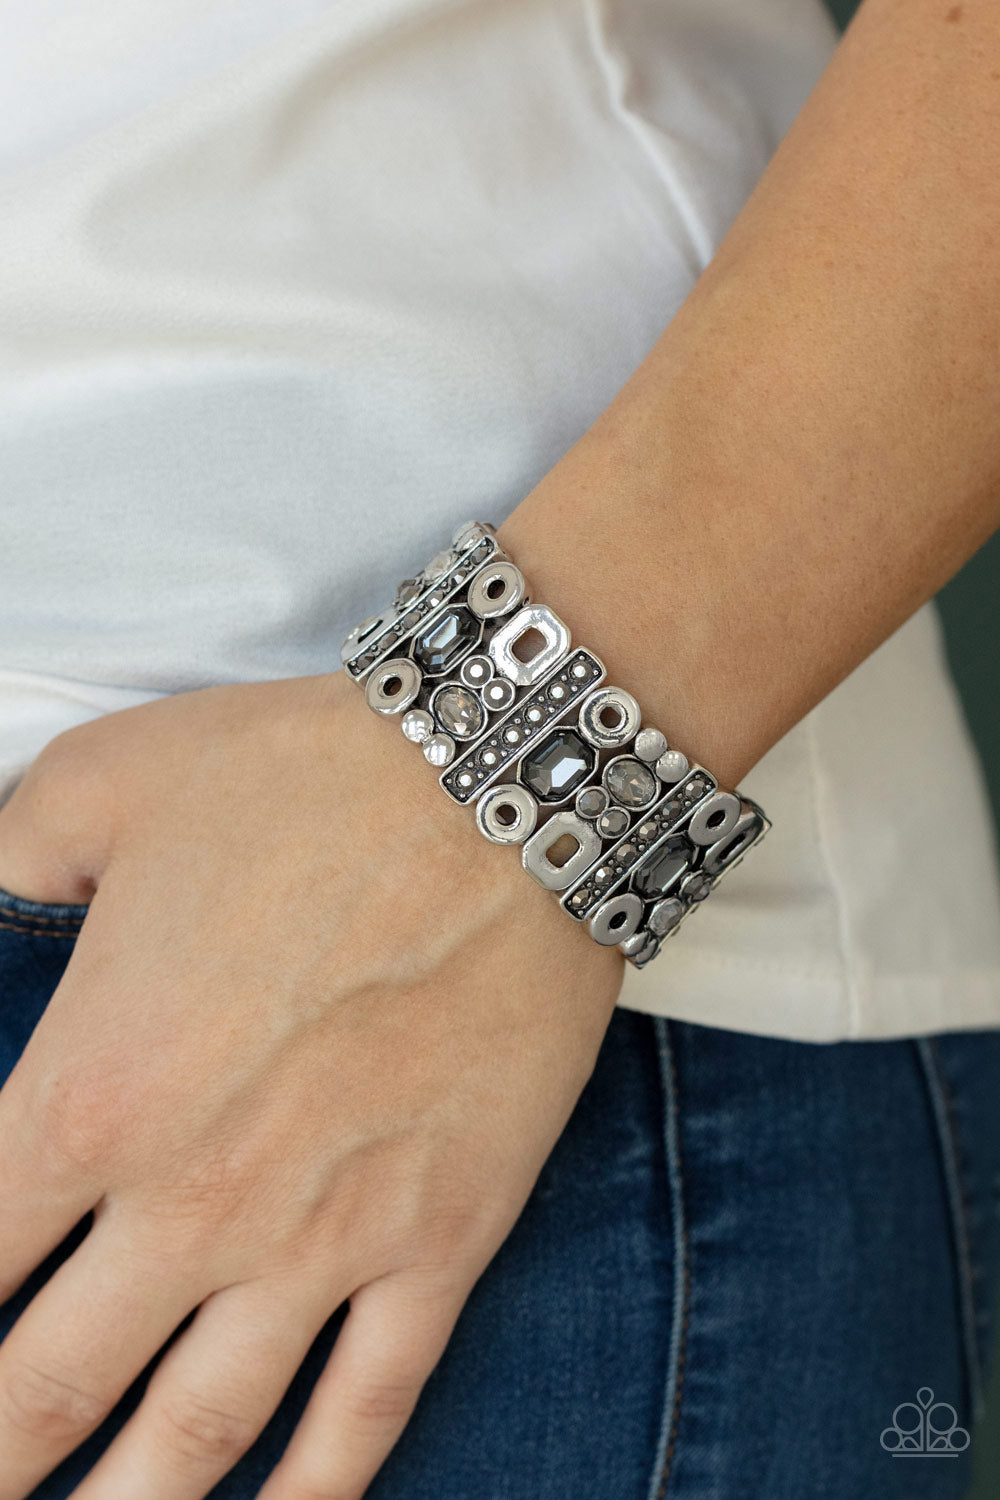 Paparazzi Accessories Dynamcally Diverse - Silver Stretch Bracelets infused with flat silver studs and geometric silver accents, a mismatched assortment of oval, round, and emerald style hematite and smoky rhinestones coalesce into edgy frames along a stretchy band for an intense sparkle around the wrist.